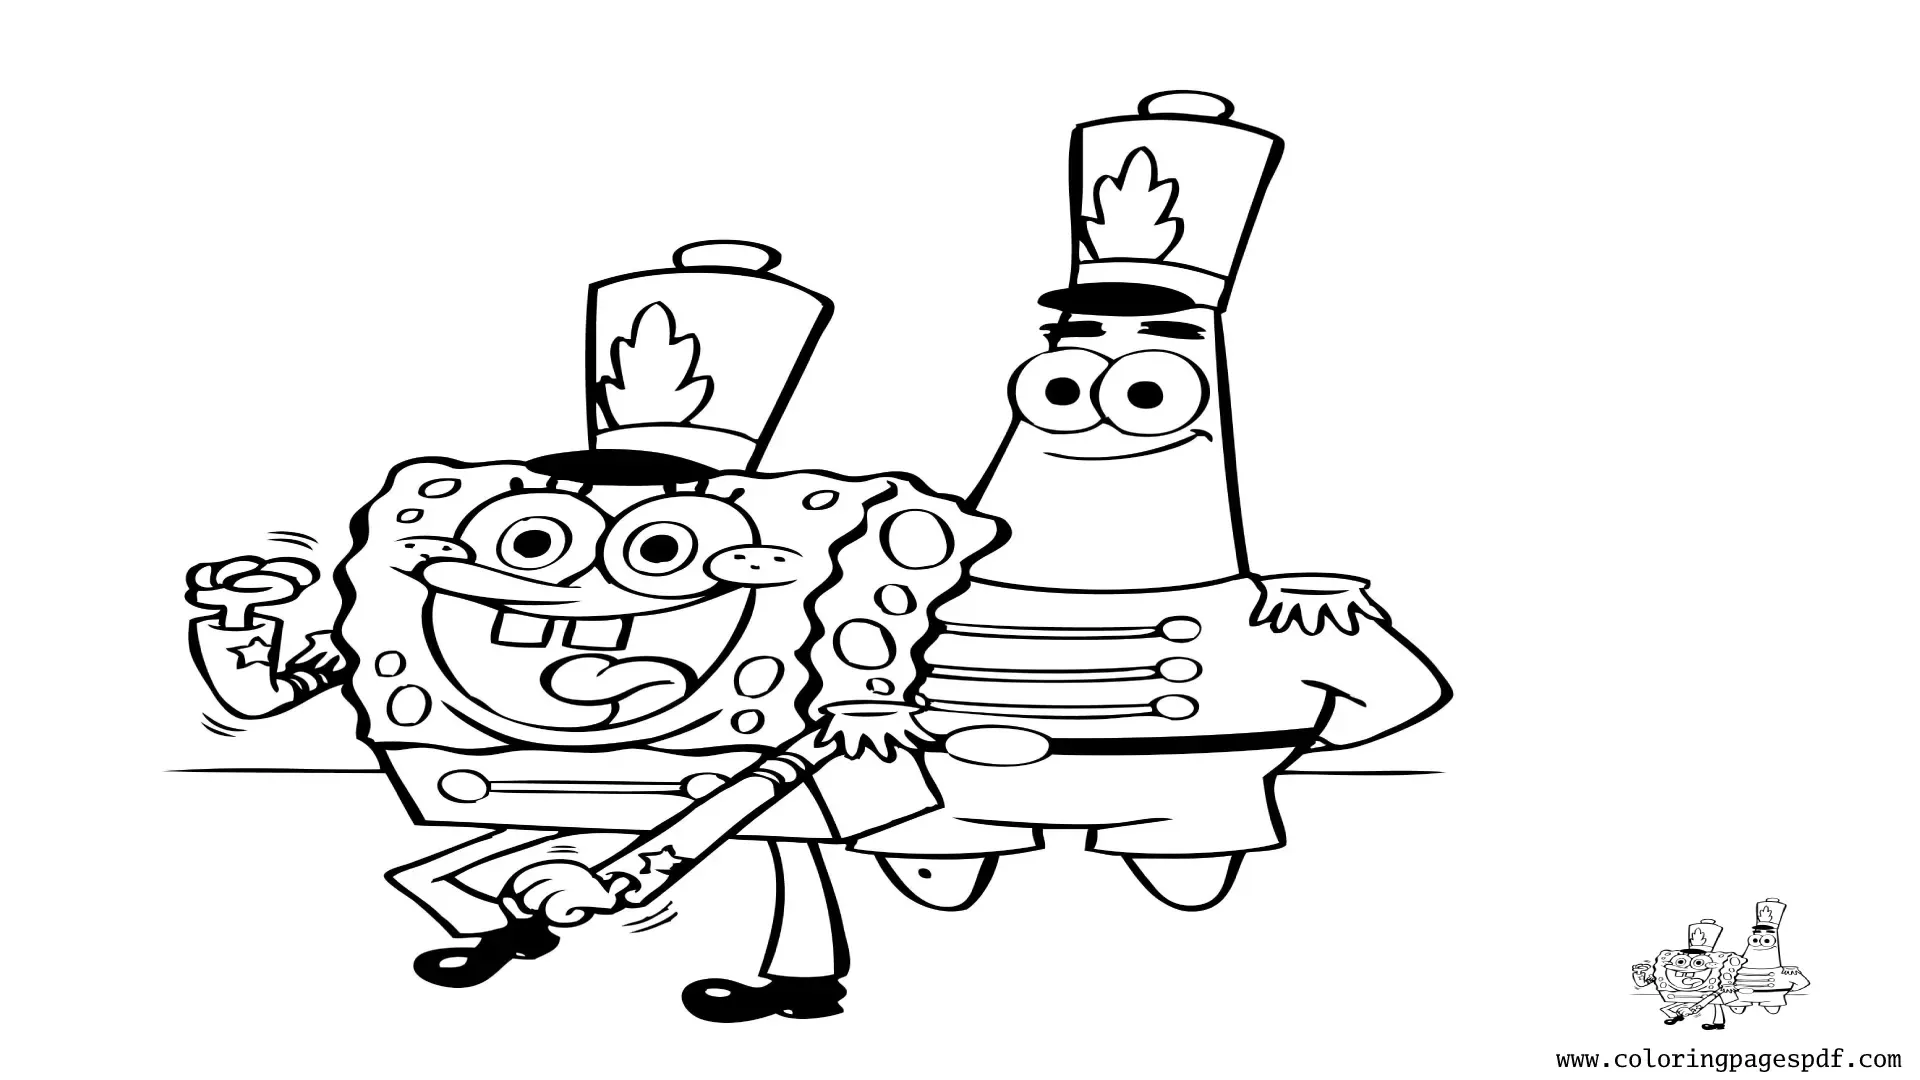 Coloring Pages Of SpongeBob And Patrick Dancing